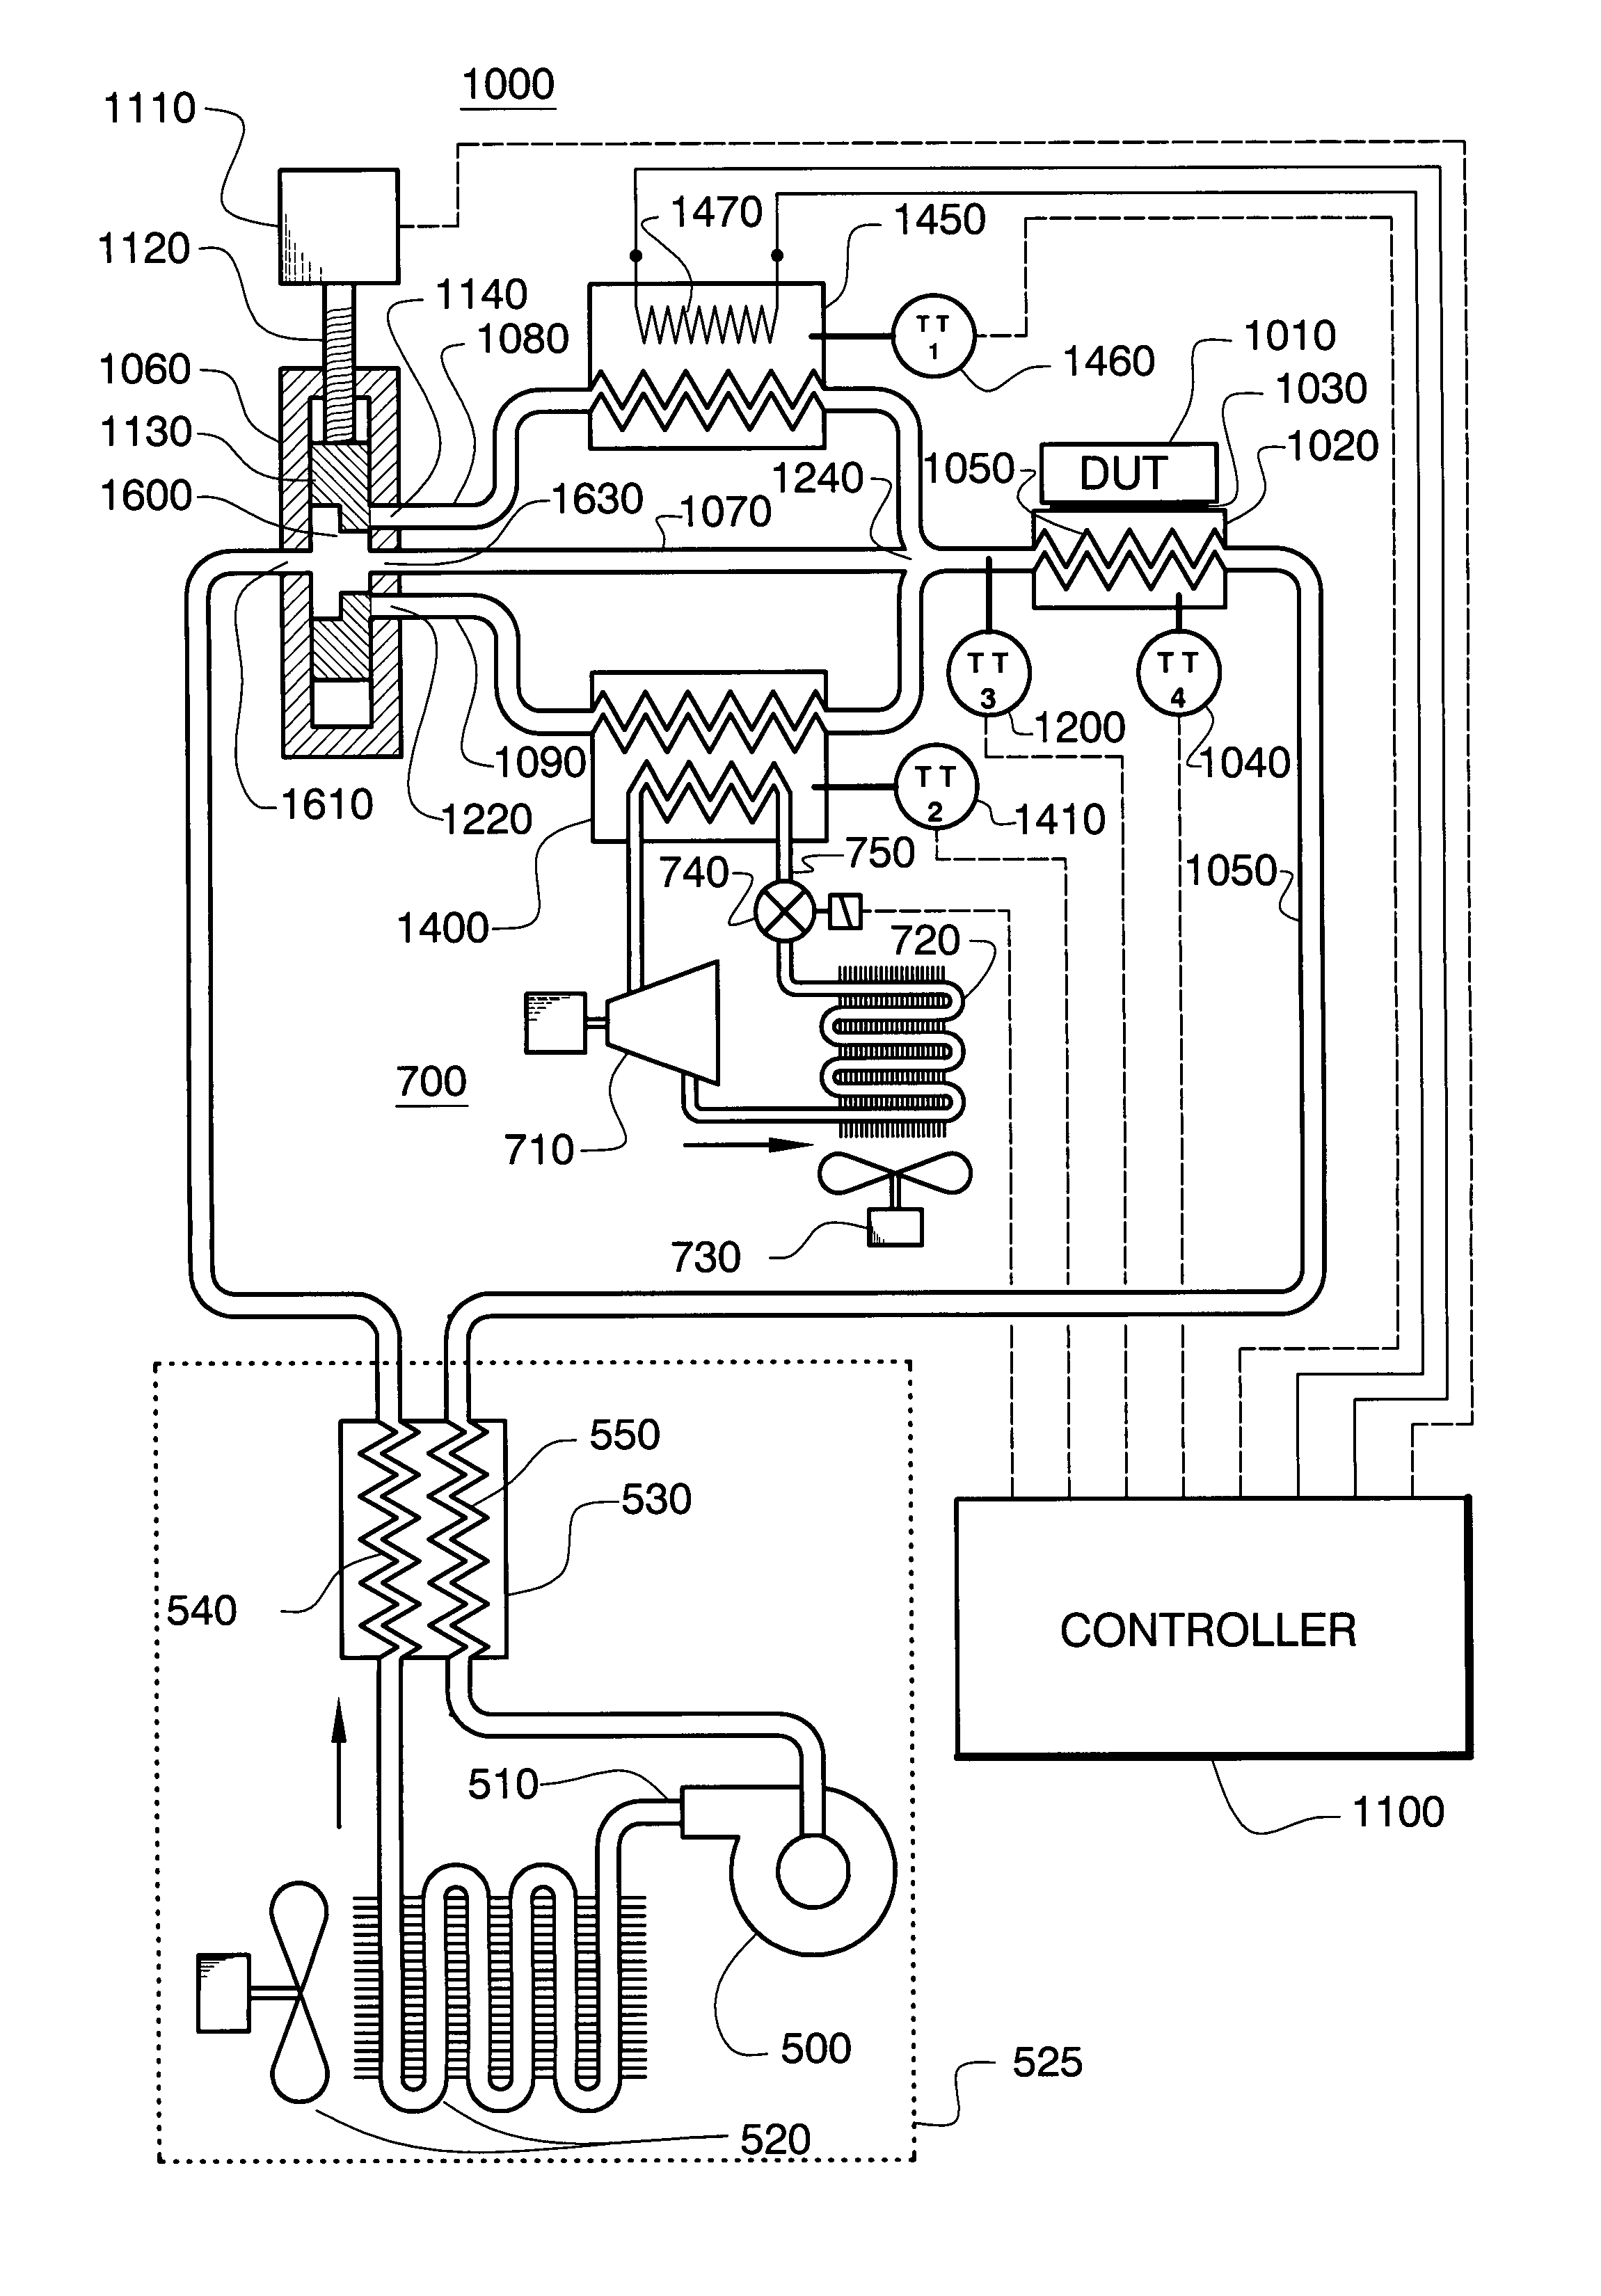 Method and apparatus for controlling temperature